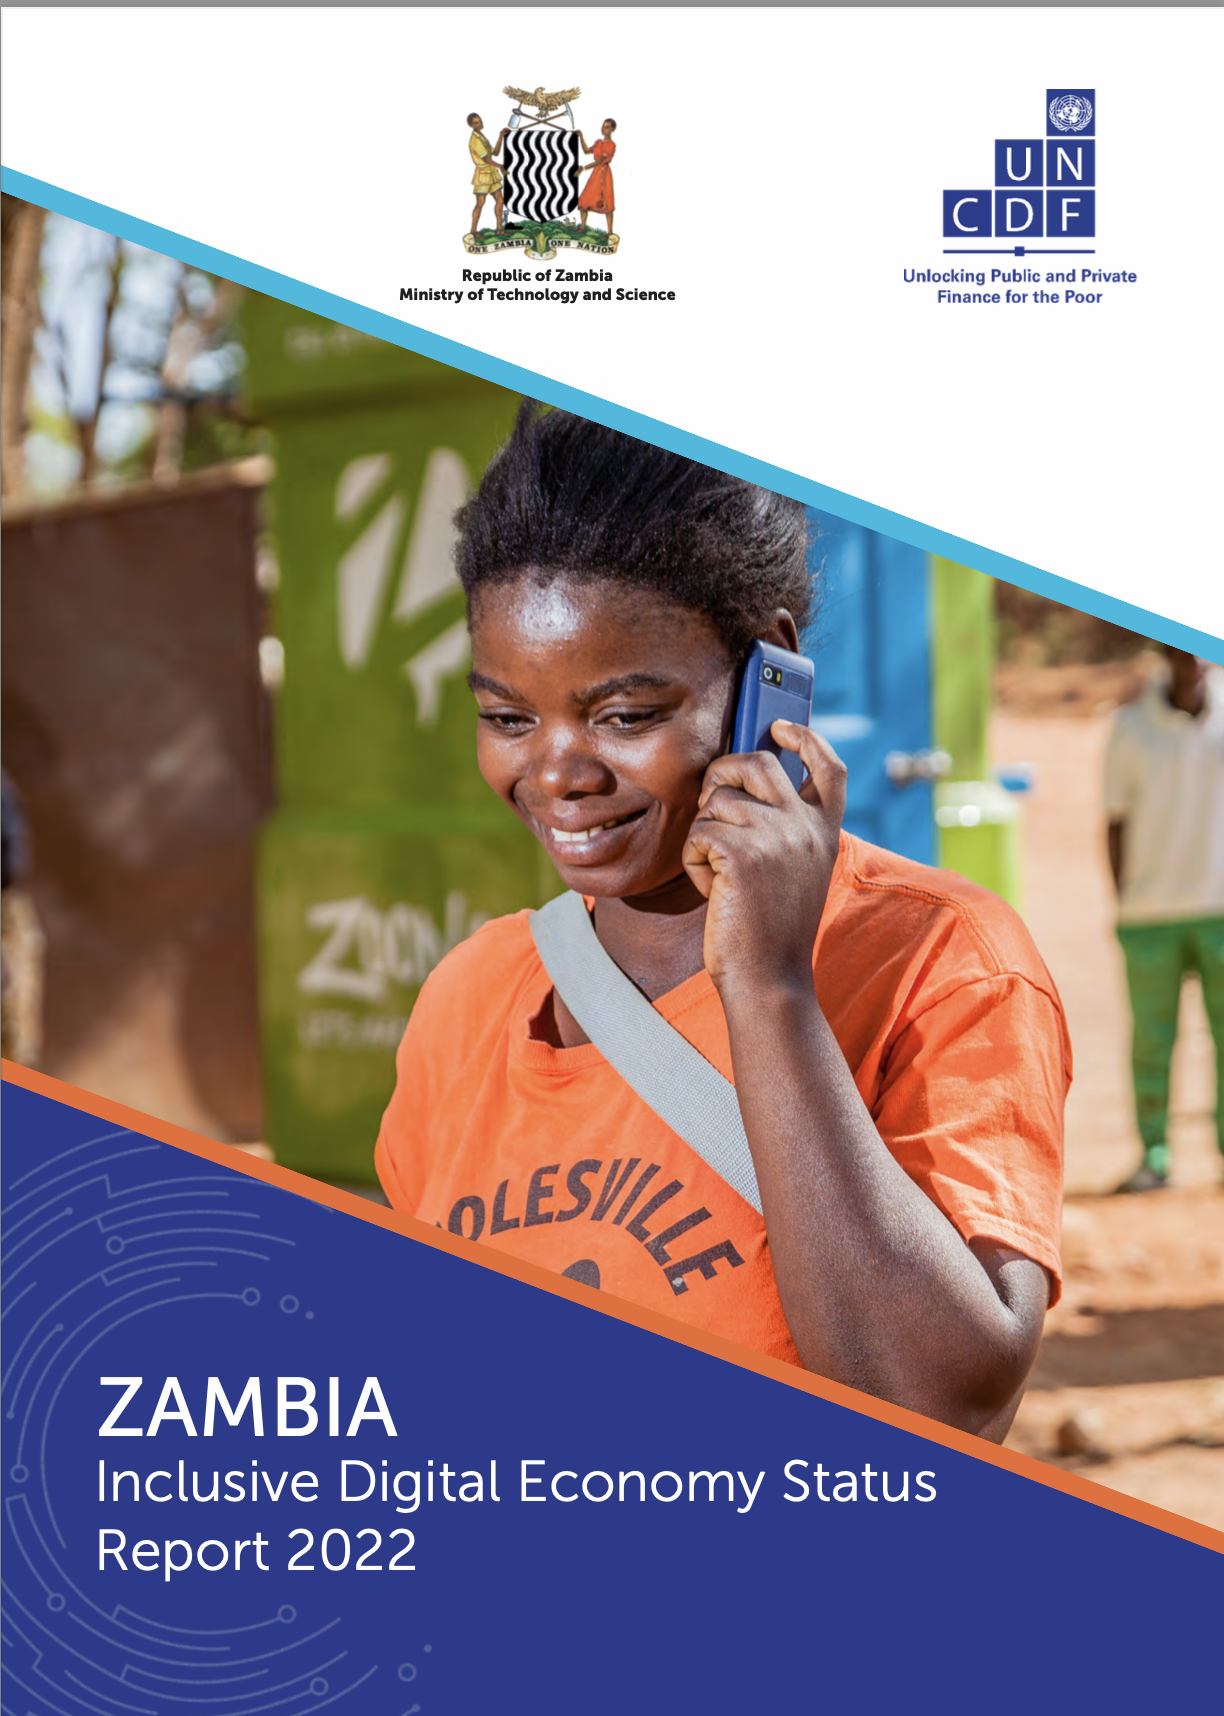 Supporting Zambia's Path to Digital Transformation with the Inclusive Digital Economy Status Report